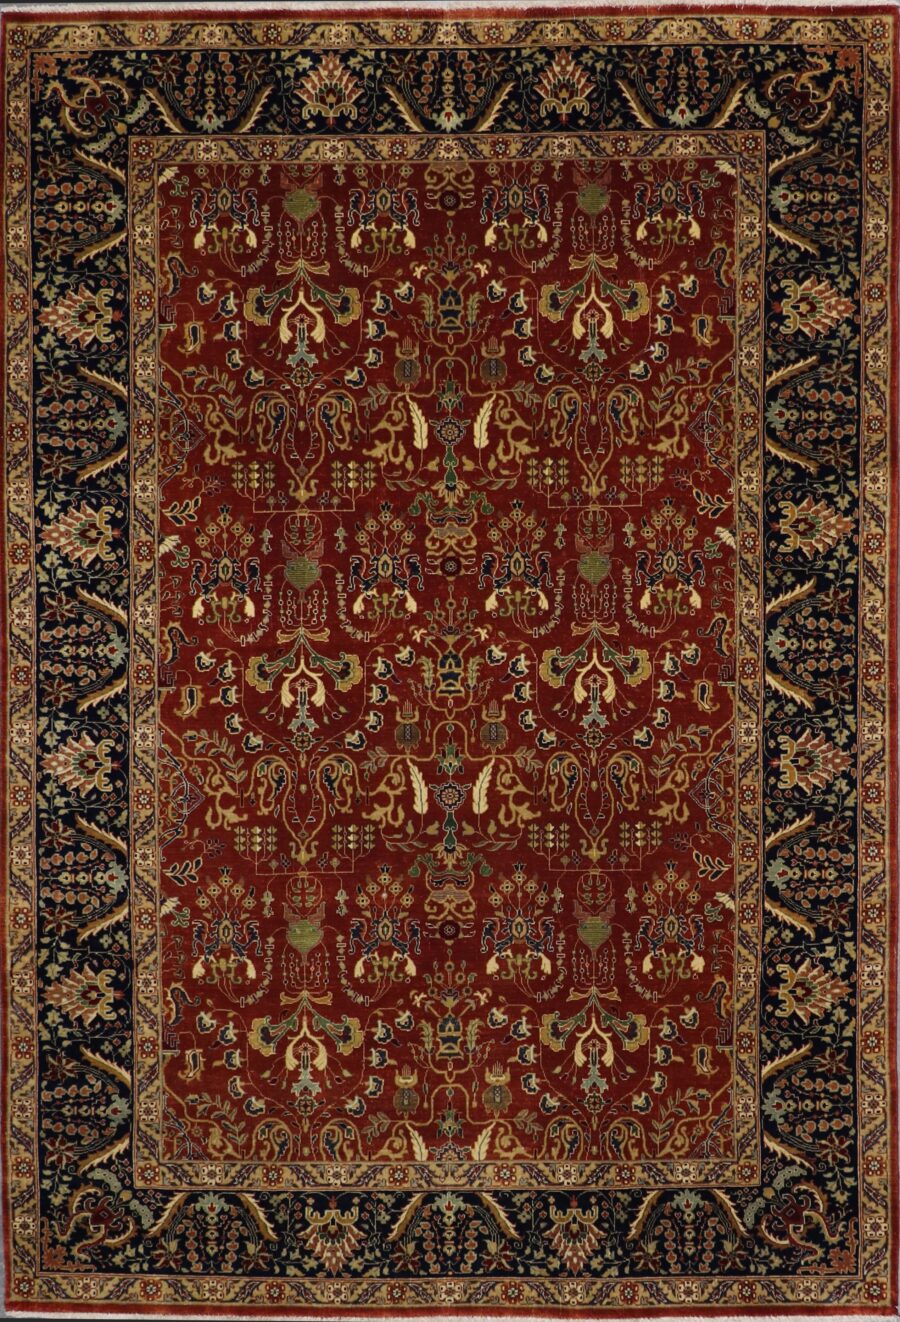 6'x9' Traditional Red Wool Hand-Knotted Rug - Direct Rug Import | Rugs in Chicago, Indiana,South Bend,Granger